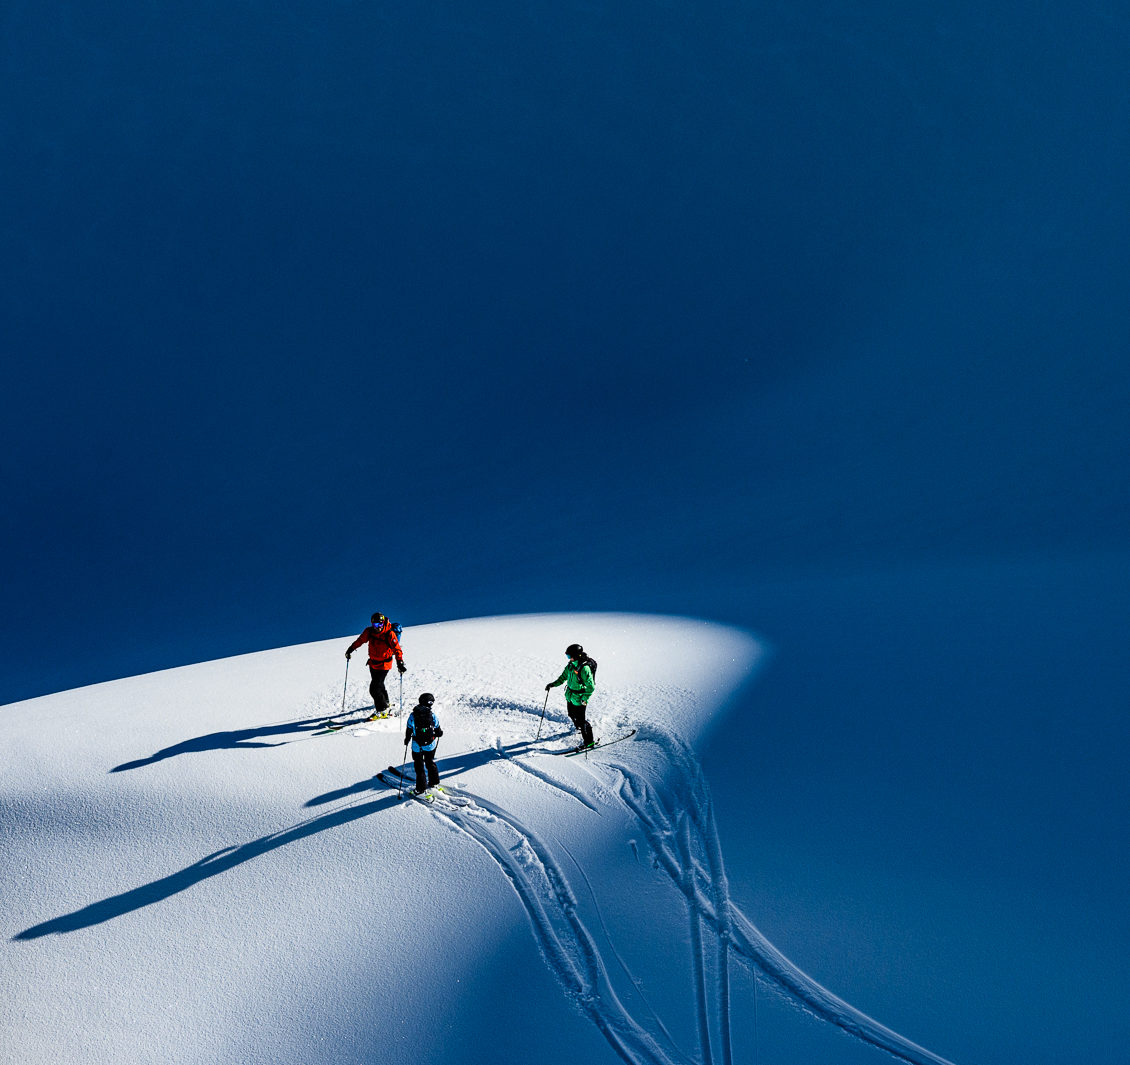 Three people standing together in the snow.